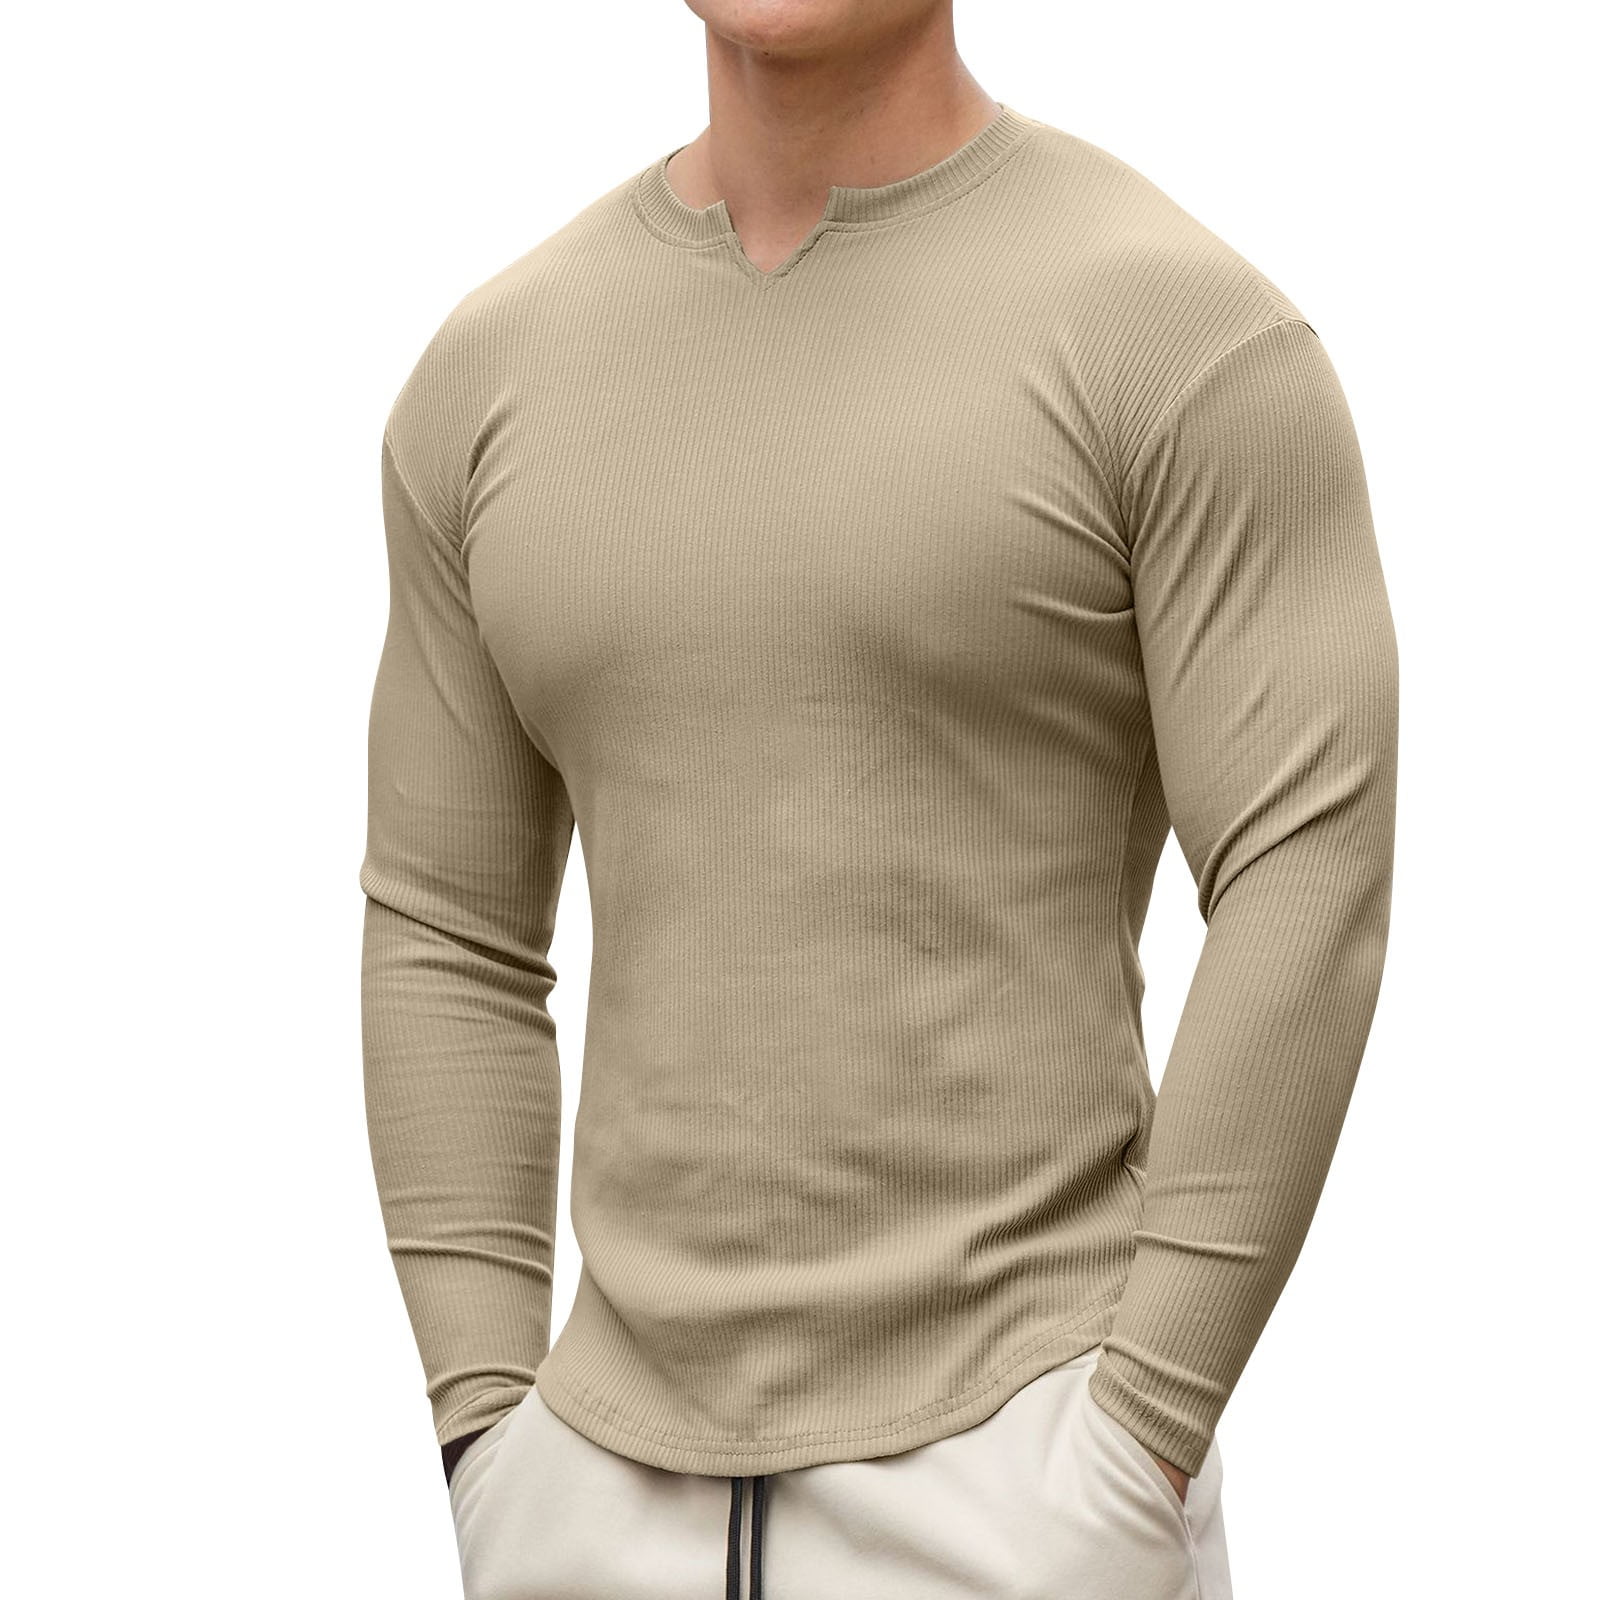 semimay male spring and summer v neck tops with solid color long sleeve casual elastic slim fit t shirts -